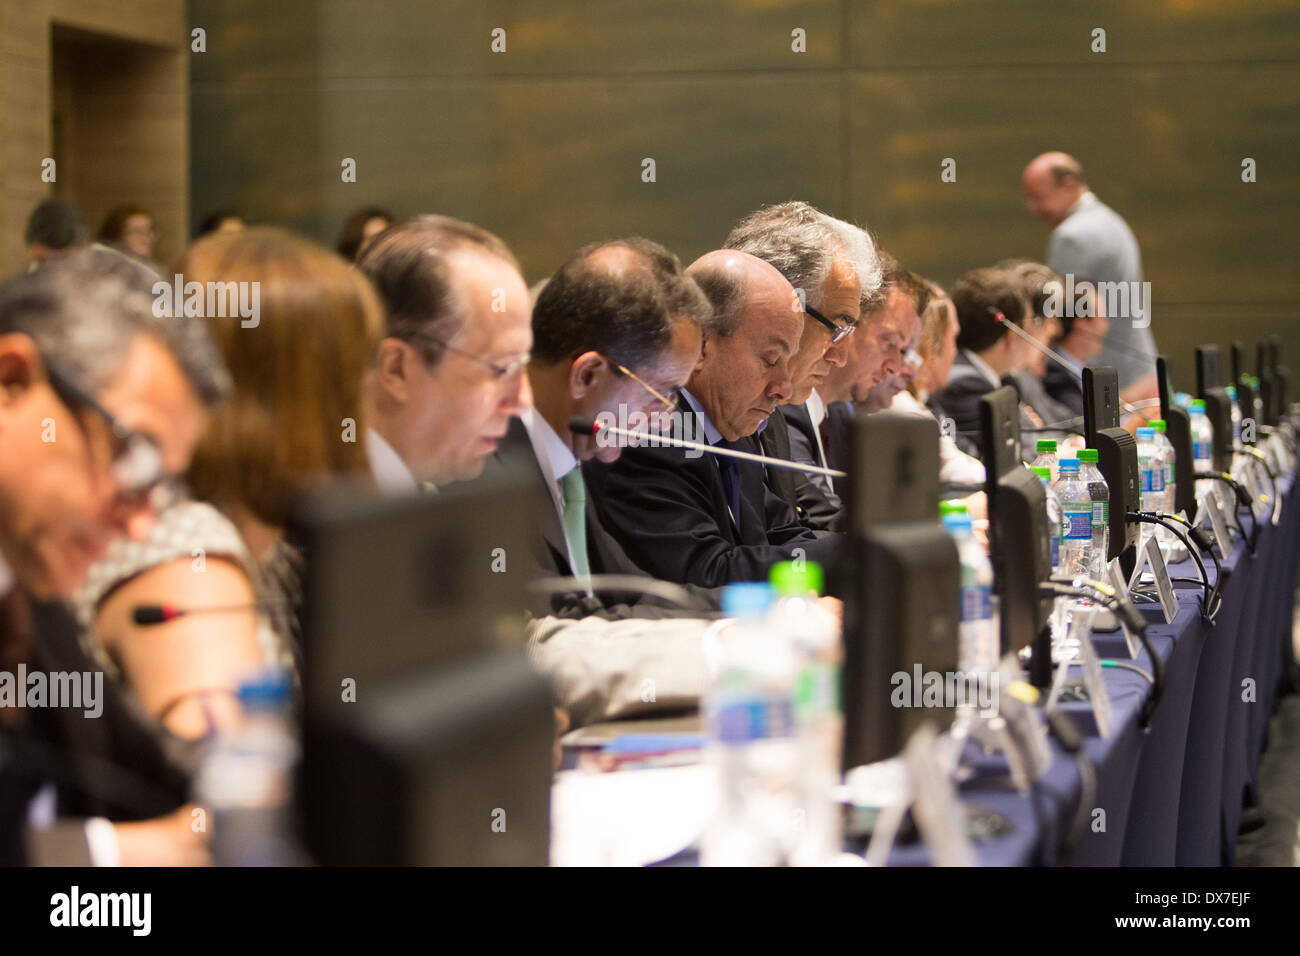 Rio De Janeiro, Brazil. 19th Mar, 2014. Representatives attend a plenary session of the Coordination Commission of the International Olympic Committee (IOC) for the Rio 2016 Games in Rio de Janeiro, Brazil, March 19, 2014. © Xu Zijian/Xinhua/Alamy Live News Stock Photo